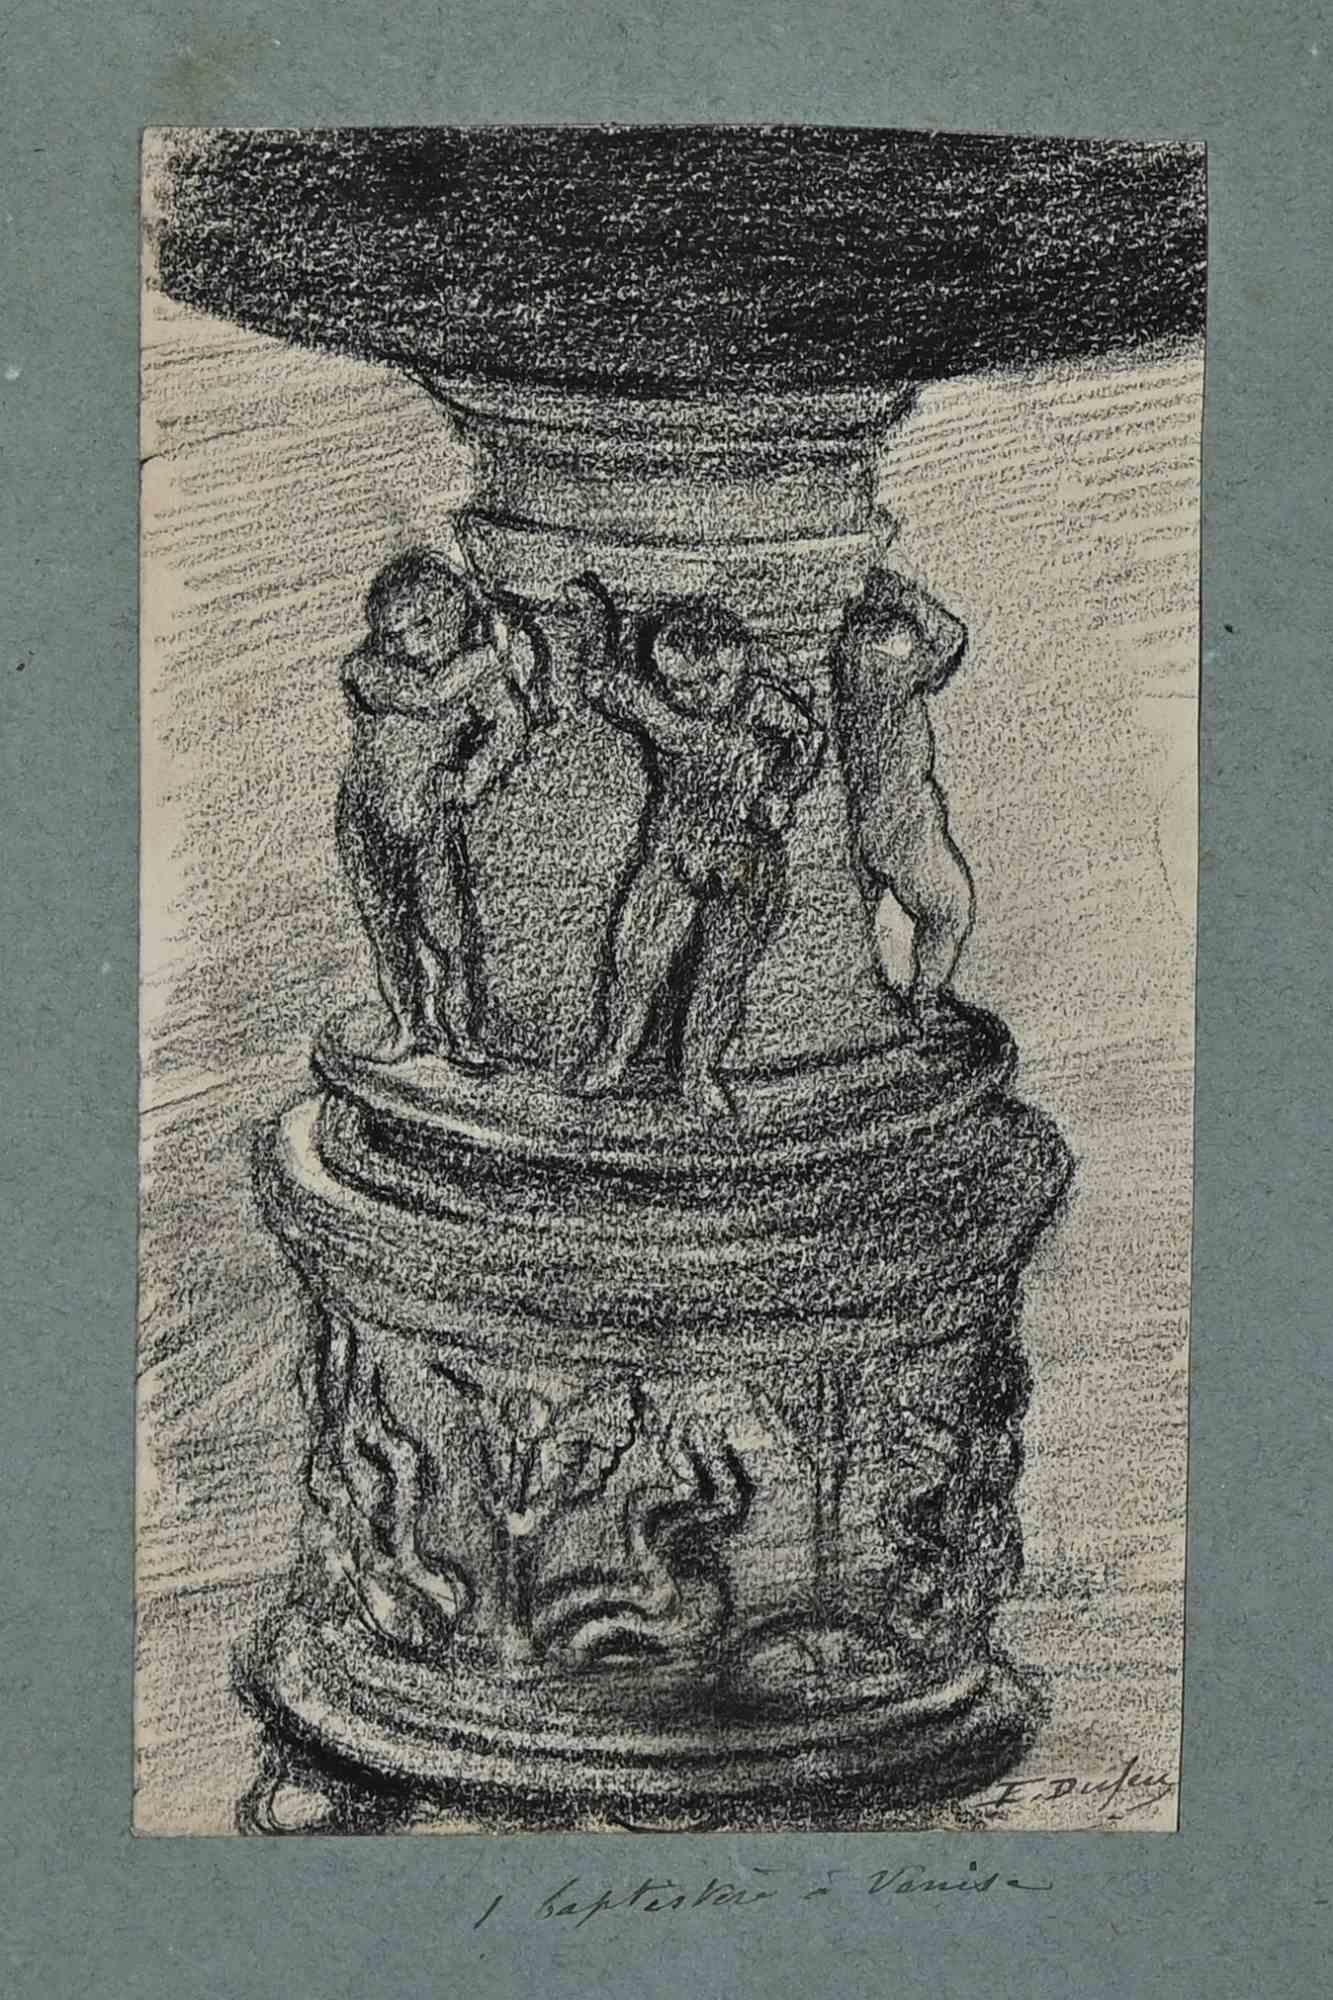 The Vase - Drawing in Pencil By Edouard Dufeu - 1890s